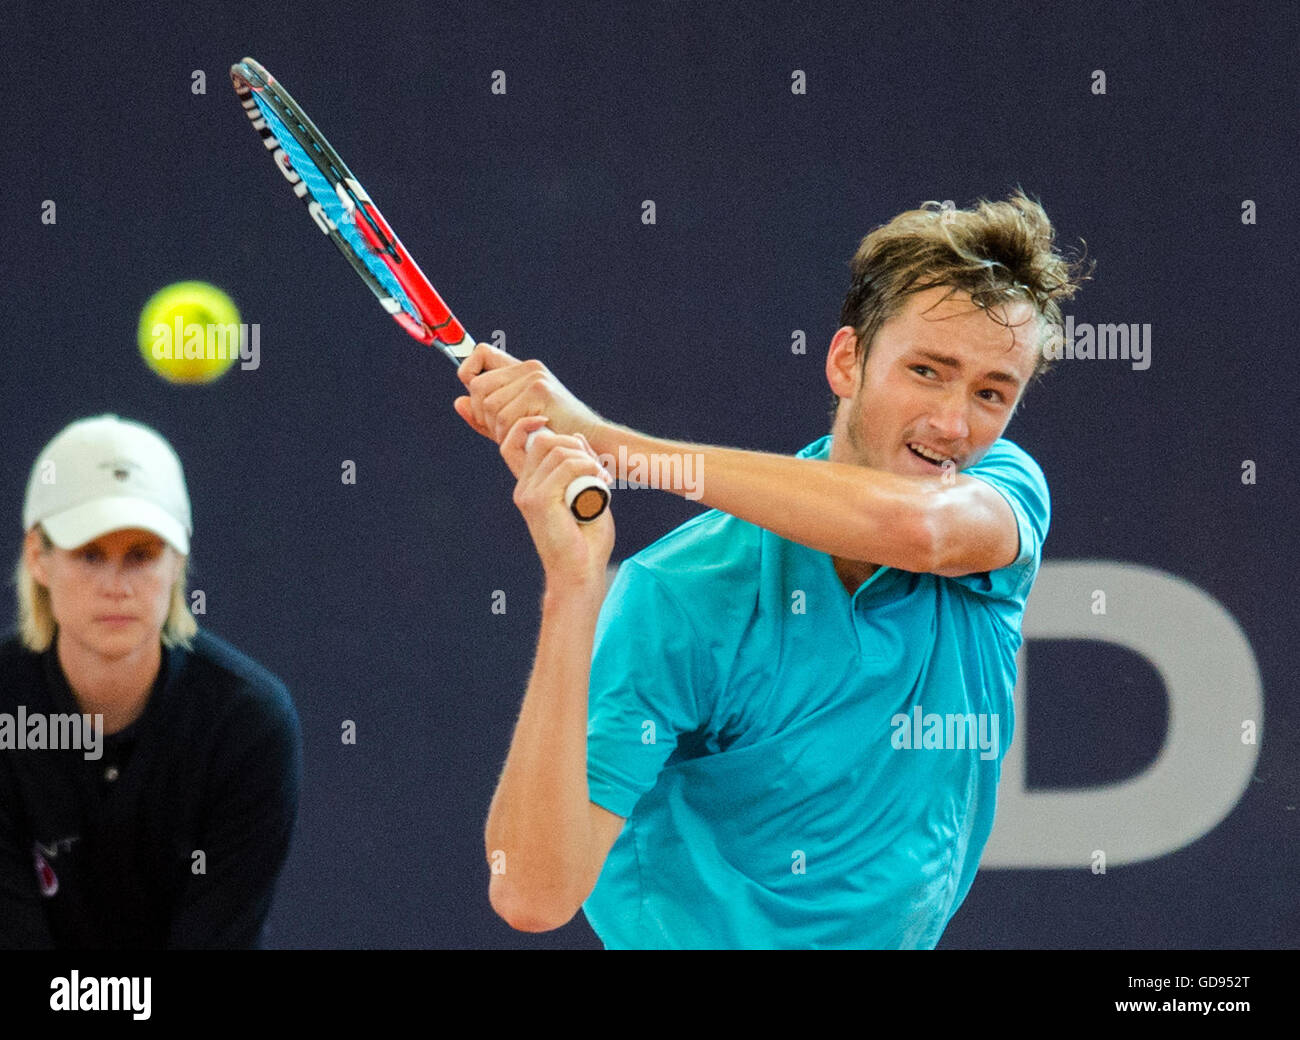 Hamburg, Germany. 14th July, 2016. Daniil Medvedev of Russia plays against Gimeno-Traver of Spain in a 2nd round match at the ATP Tour - German Tennis Championships at the Am Rothenbaum tennis court in Hamburg, Germany, 14 July 2016. Photo: DANIEL BOCKWOLDT/dpa/Alamy Live News Stock Photo